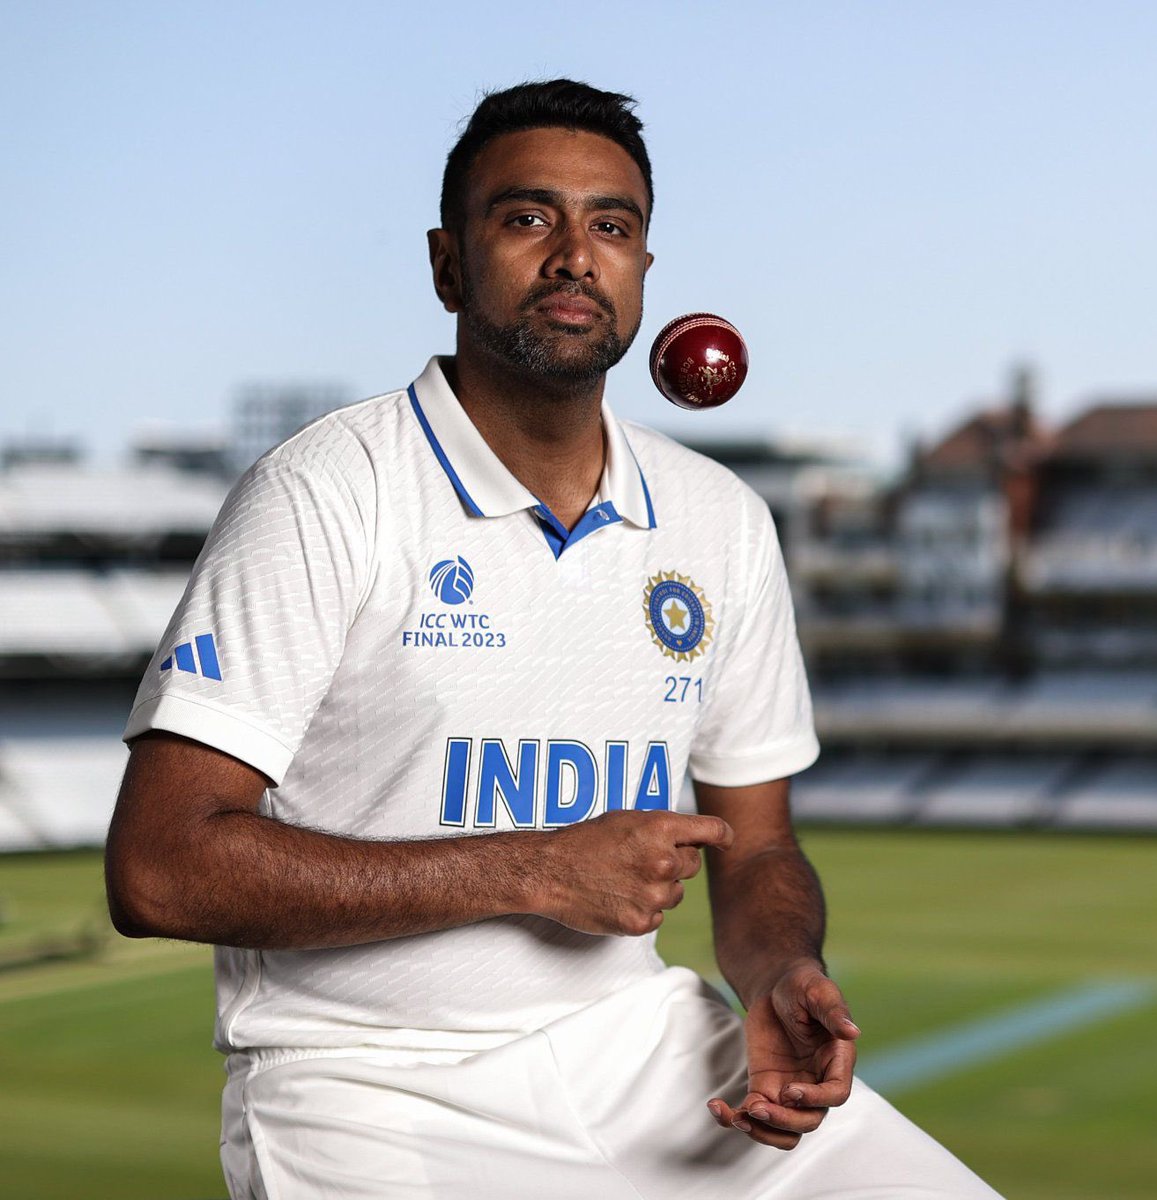 Congratulations to @ashwinravi99 on reaching an incredible milestone with 700 international wickets- A true legend proving his power & consistency! 🏏💯

#Ashwin #InternationalCricket #700Wickets #TeamIndia